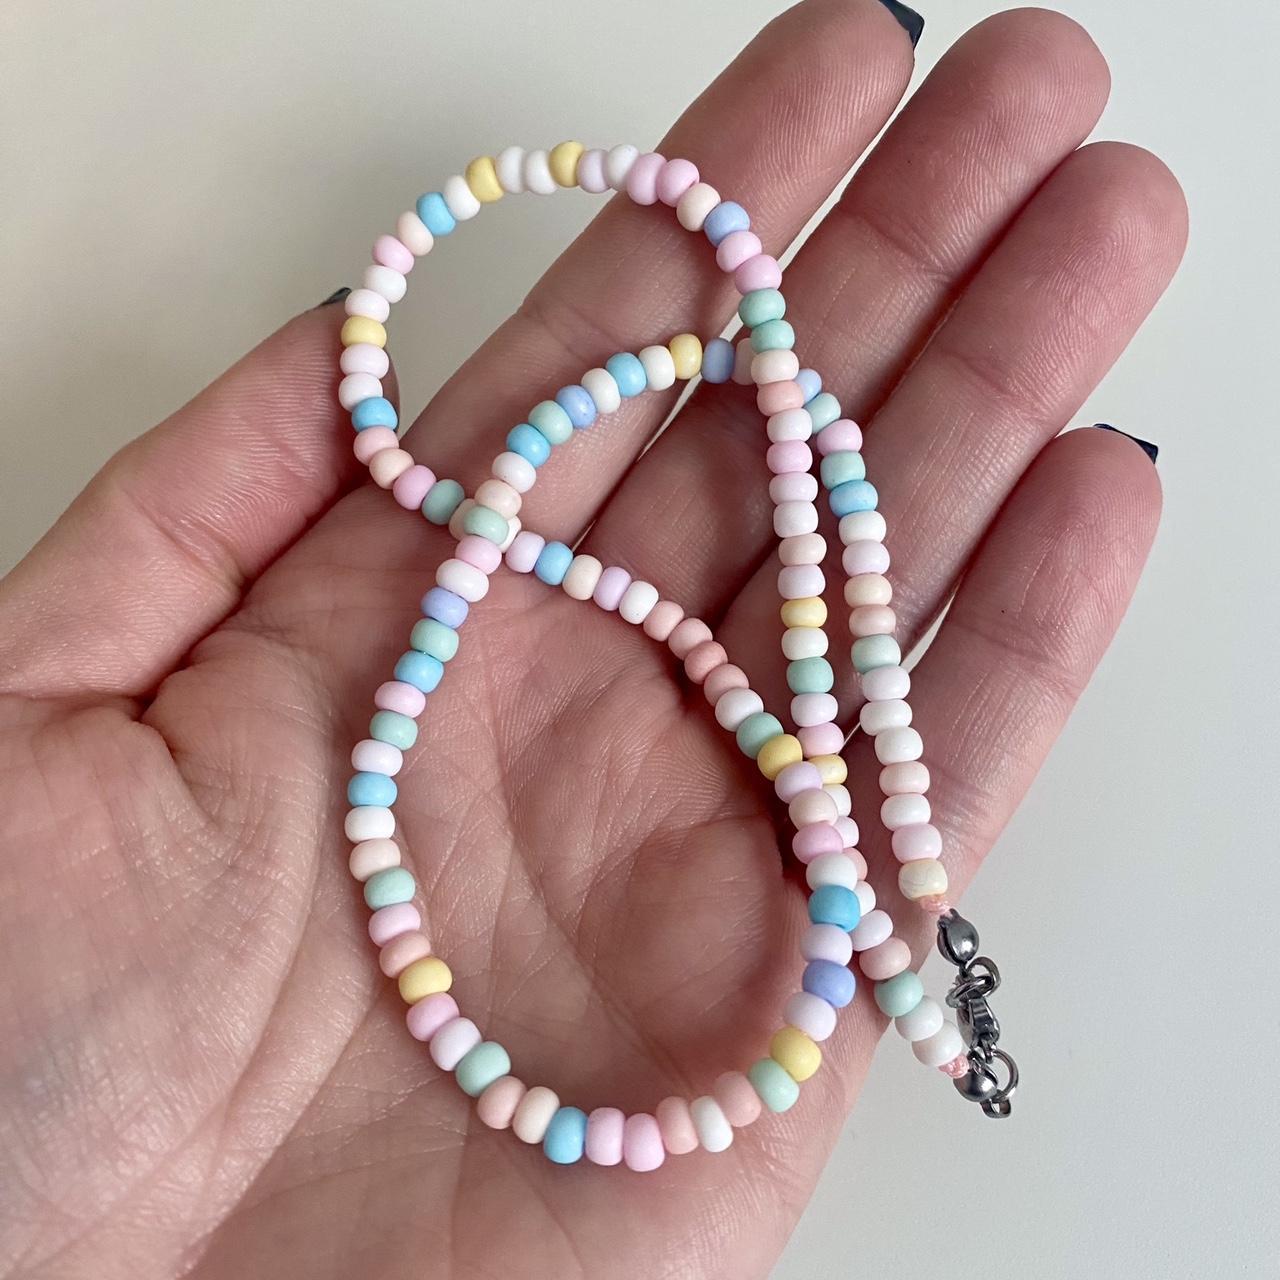 Fruitabees Wooden Bead Necklace - CANDY NECKLACE